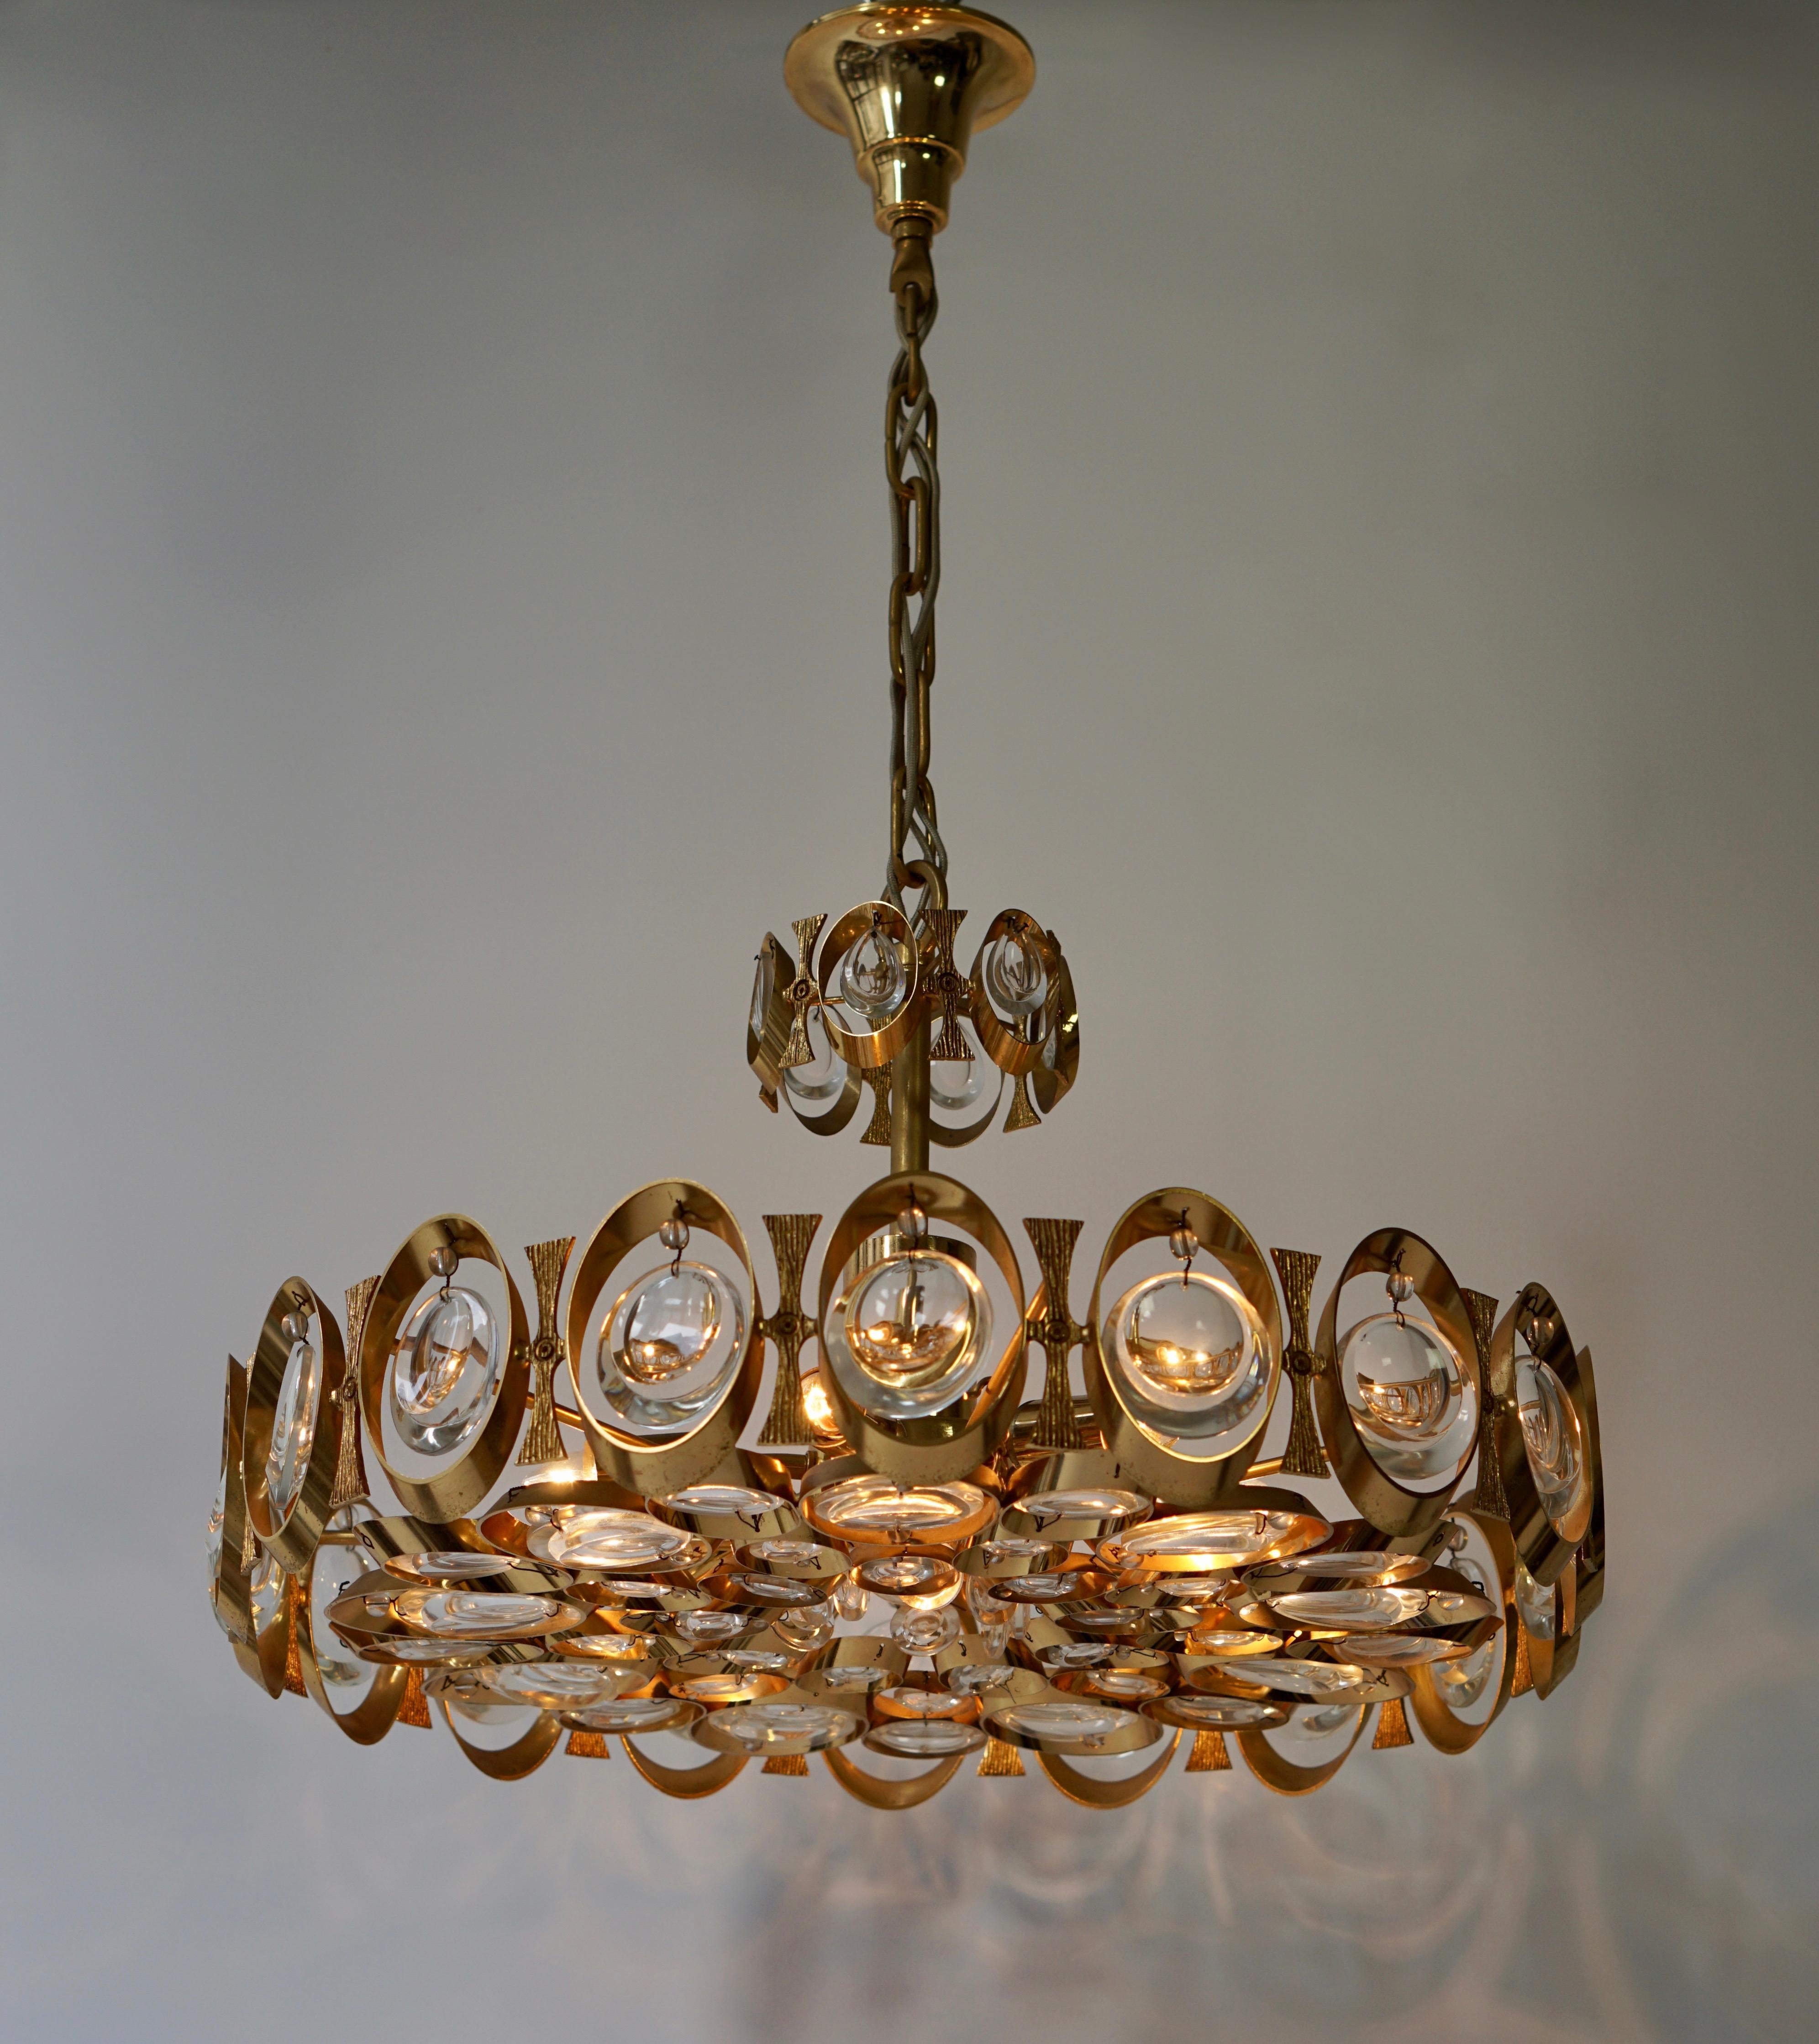 A stunning 24-karat gold-plated brass Hollywood Regency chandelier or pendant light by Palwa (Palme & Walter), Germany, manufactured in midcentury, circa 1970 (end of 1960s or early 1970s). This wonderful fixture is made of a gilded brass frame